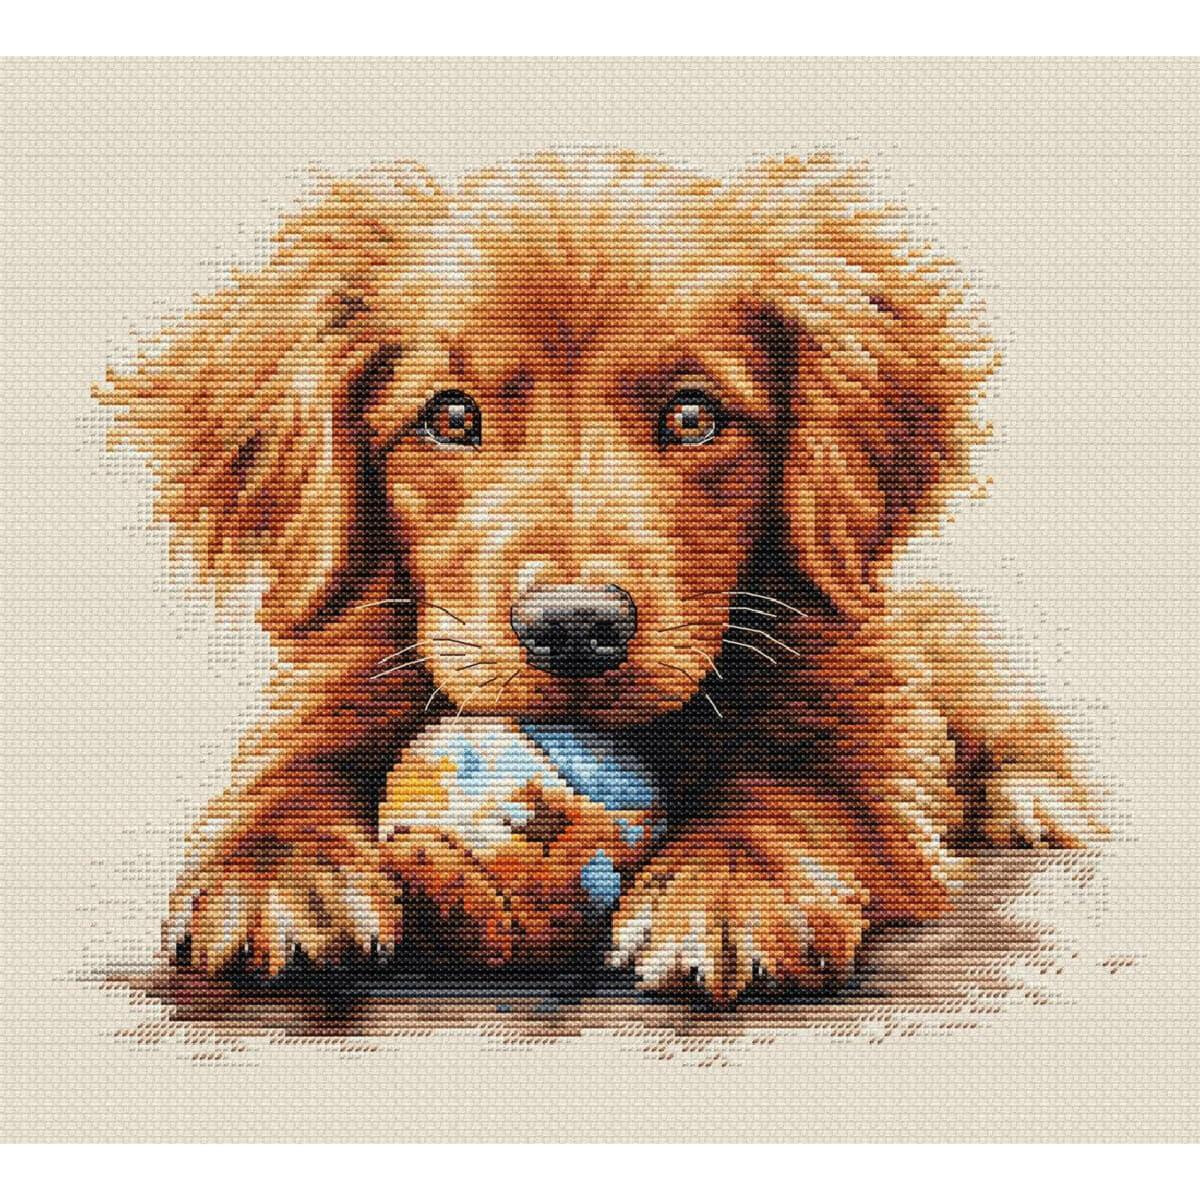 This Luca-s embroidery pack features a cute brown puppy...